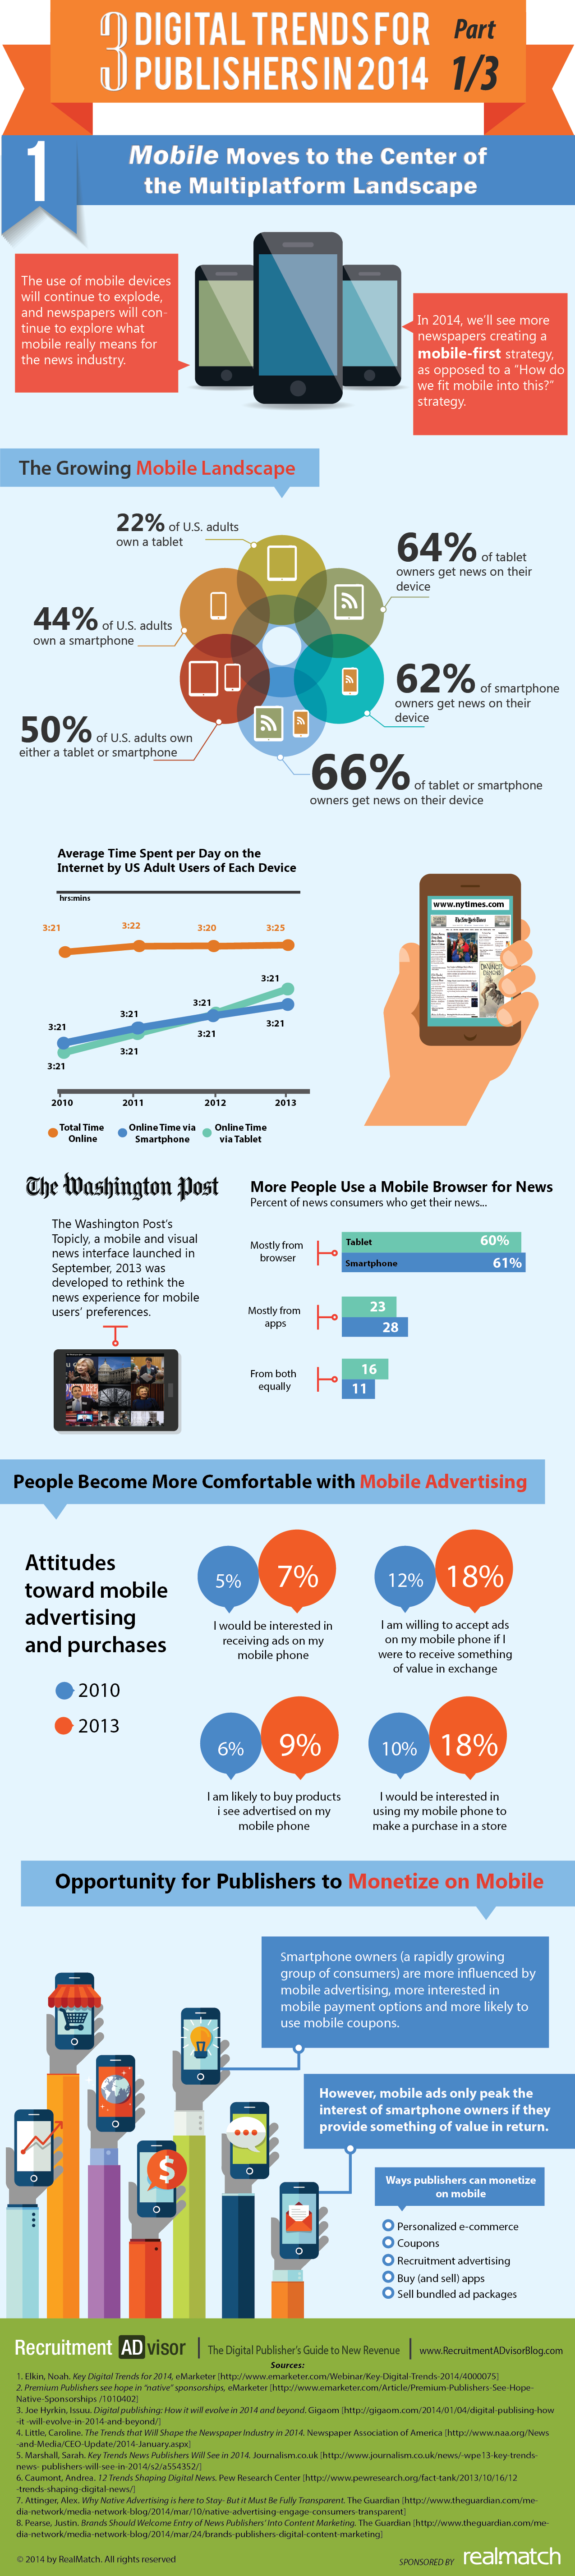 3 Digital Trends for Publishers in 2014 Mobile